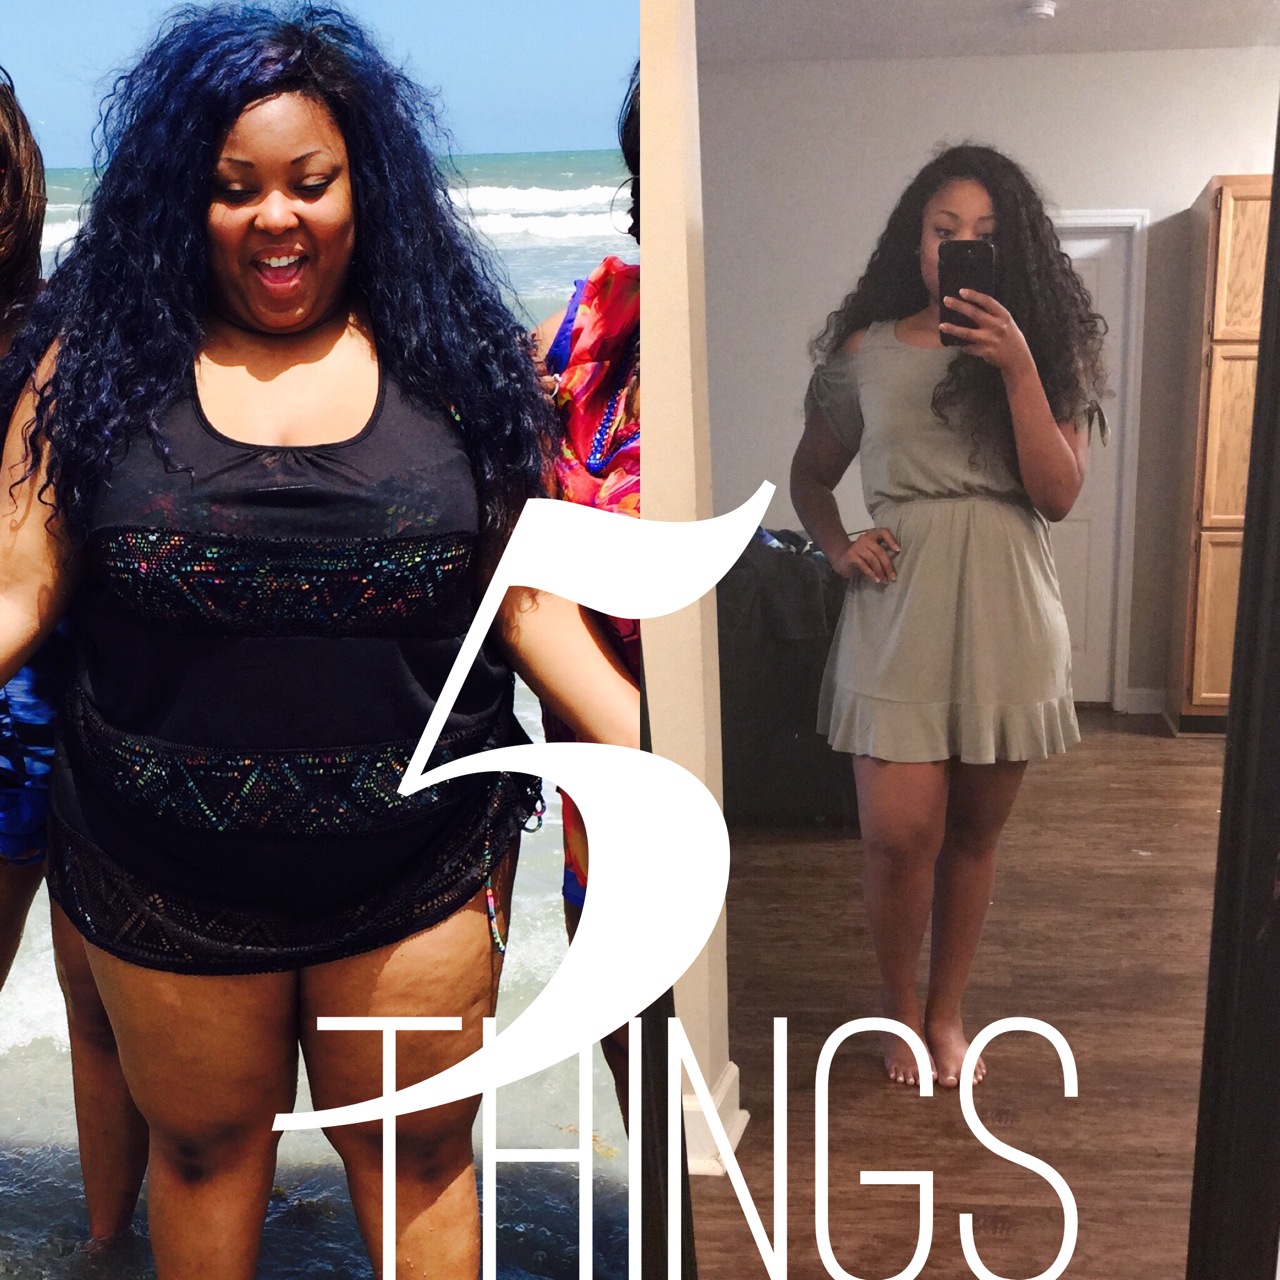 5 THINGS I'VE LEARNED SINCE LOSING A SIGNIFICANT AMOUNT OF WEIGHT